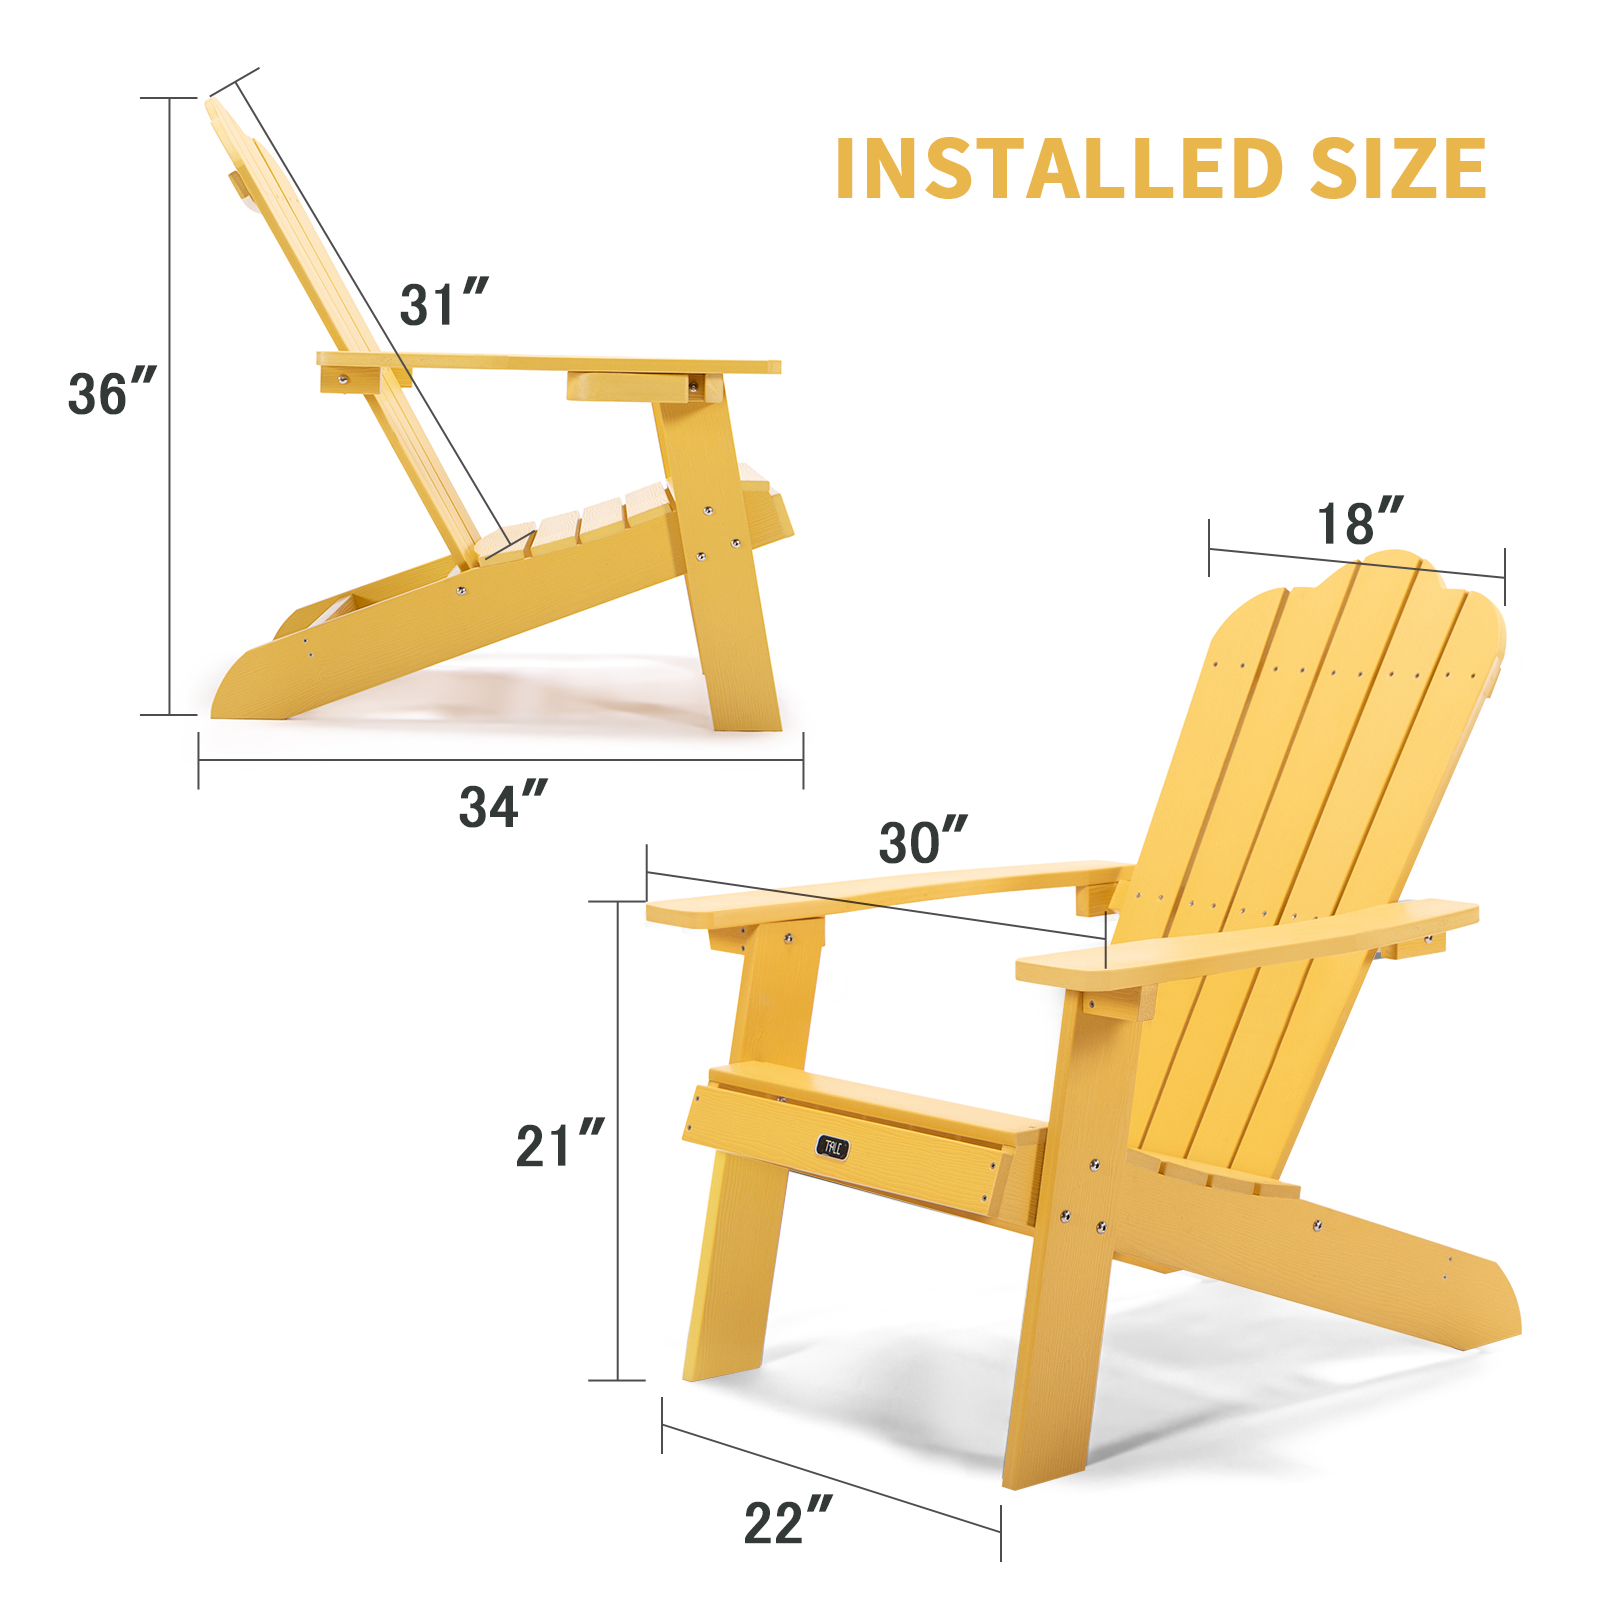 Adirondack Chair with Cup Holder, Patio Outdoor Chairs, Weather Resistant Lounge Chair, Fade-Resistant, Backyard Furniture Painted Chair, for Lawn Outdoor Patio Deck Garden Porch Lawn - image 2 of 7